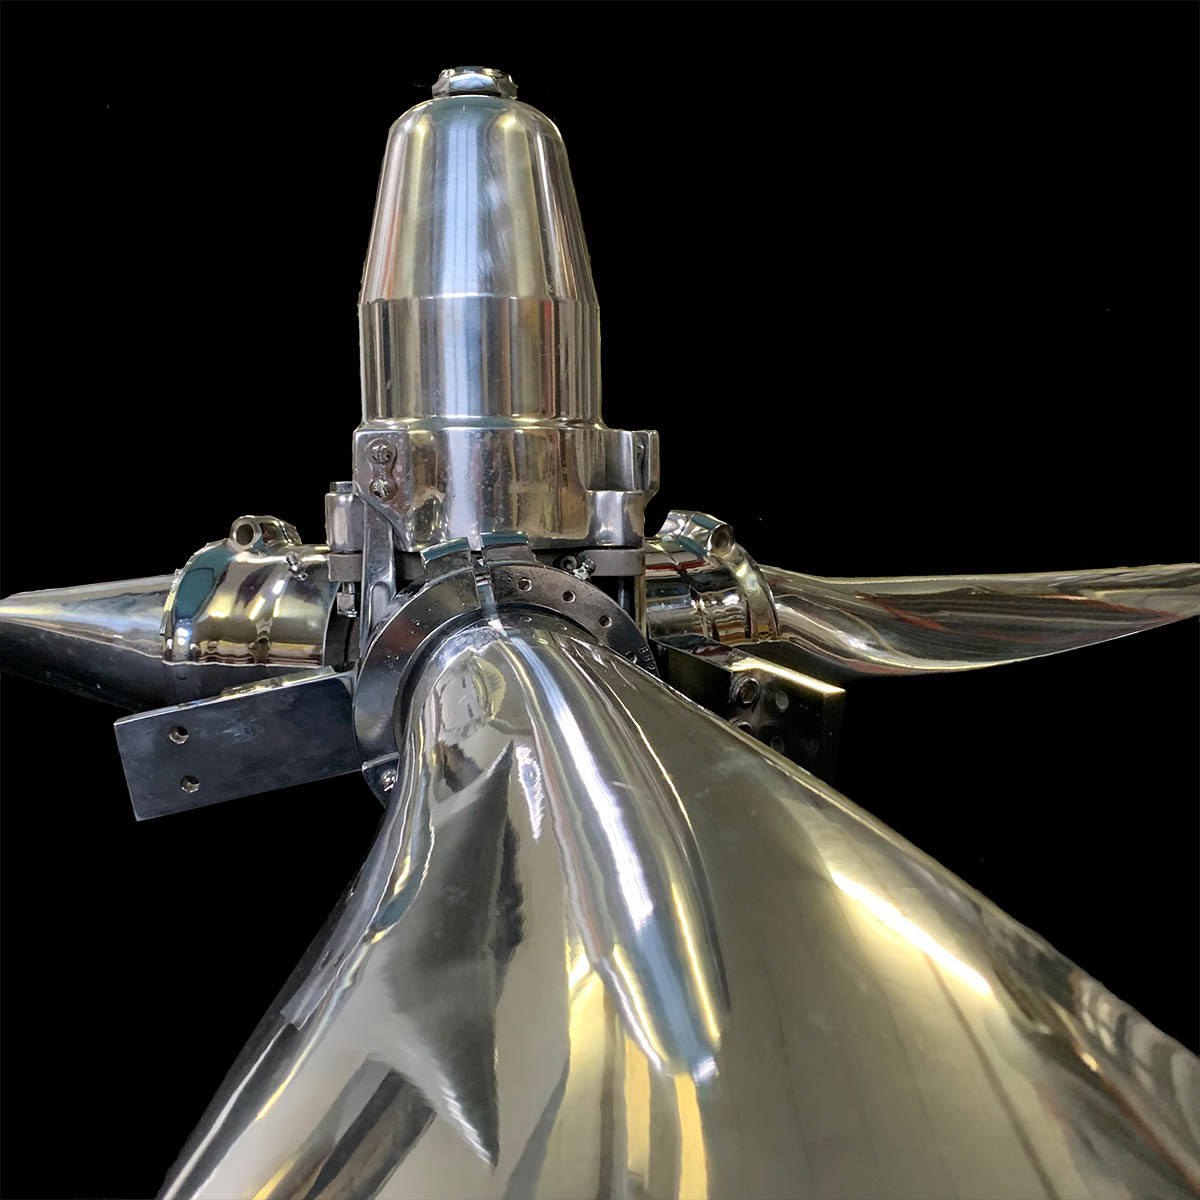 Detail of a Hartzell propeller and hub that was polished and prepared for display purposes.